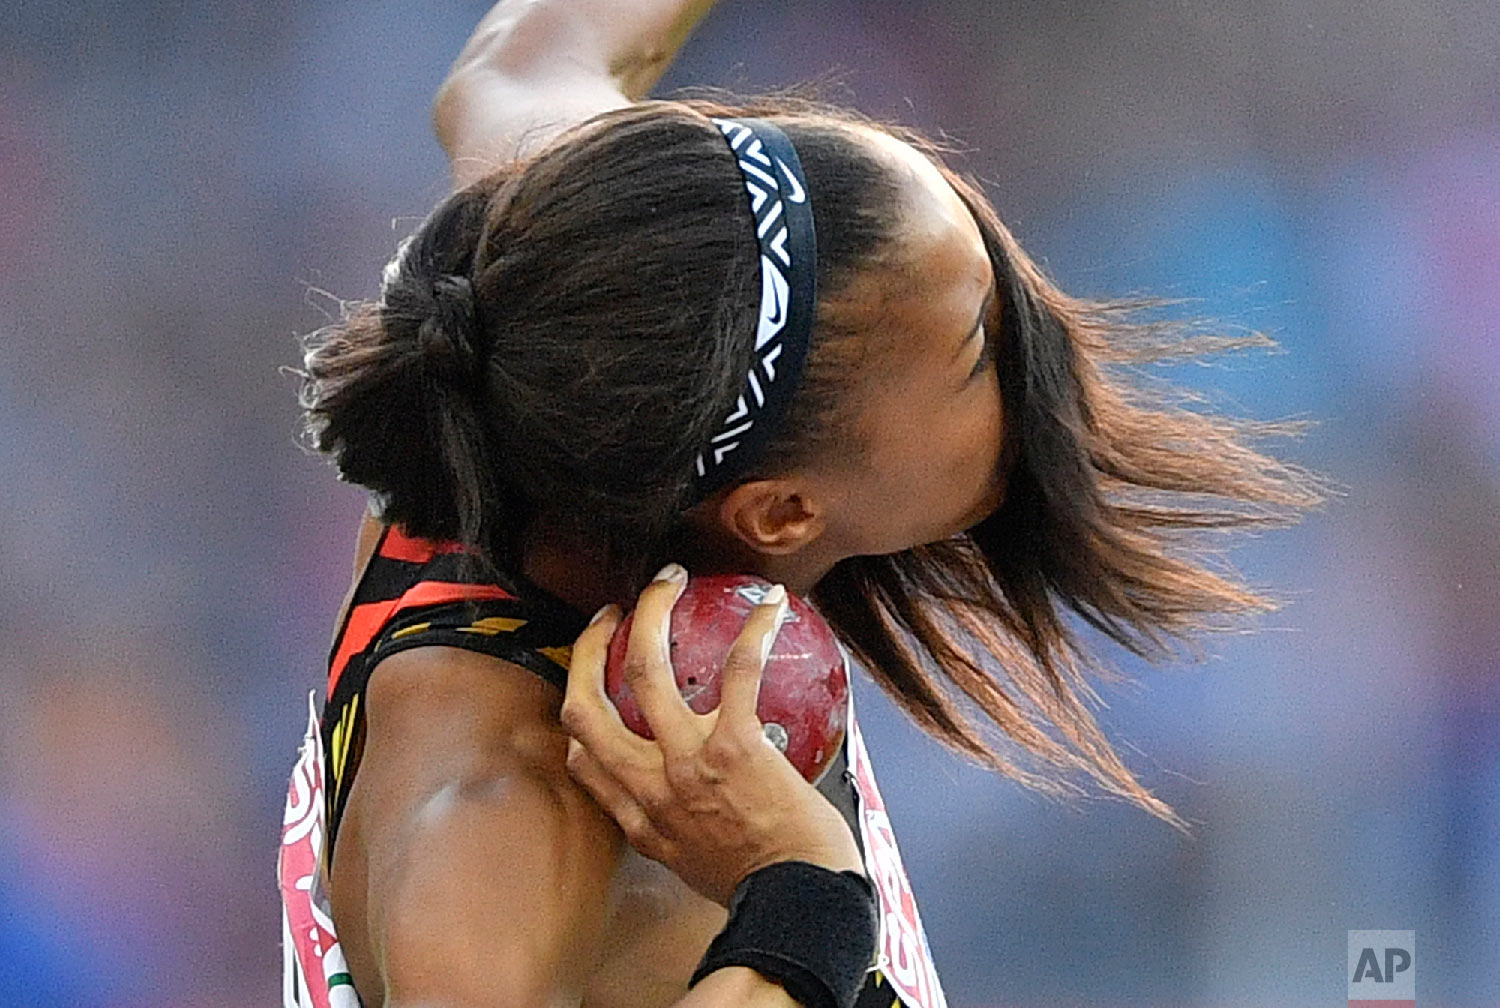  Belgium's Nafissatou Thiam makes an attempt in the shot put of the heptathlon at the European Athletics Championships at the Olympic stadium in Berlin, Germany on Aug. 9, 2018.. (AP Photo/Martin Meissner) 